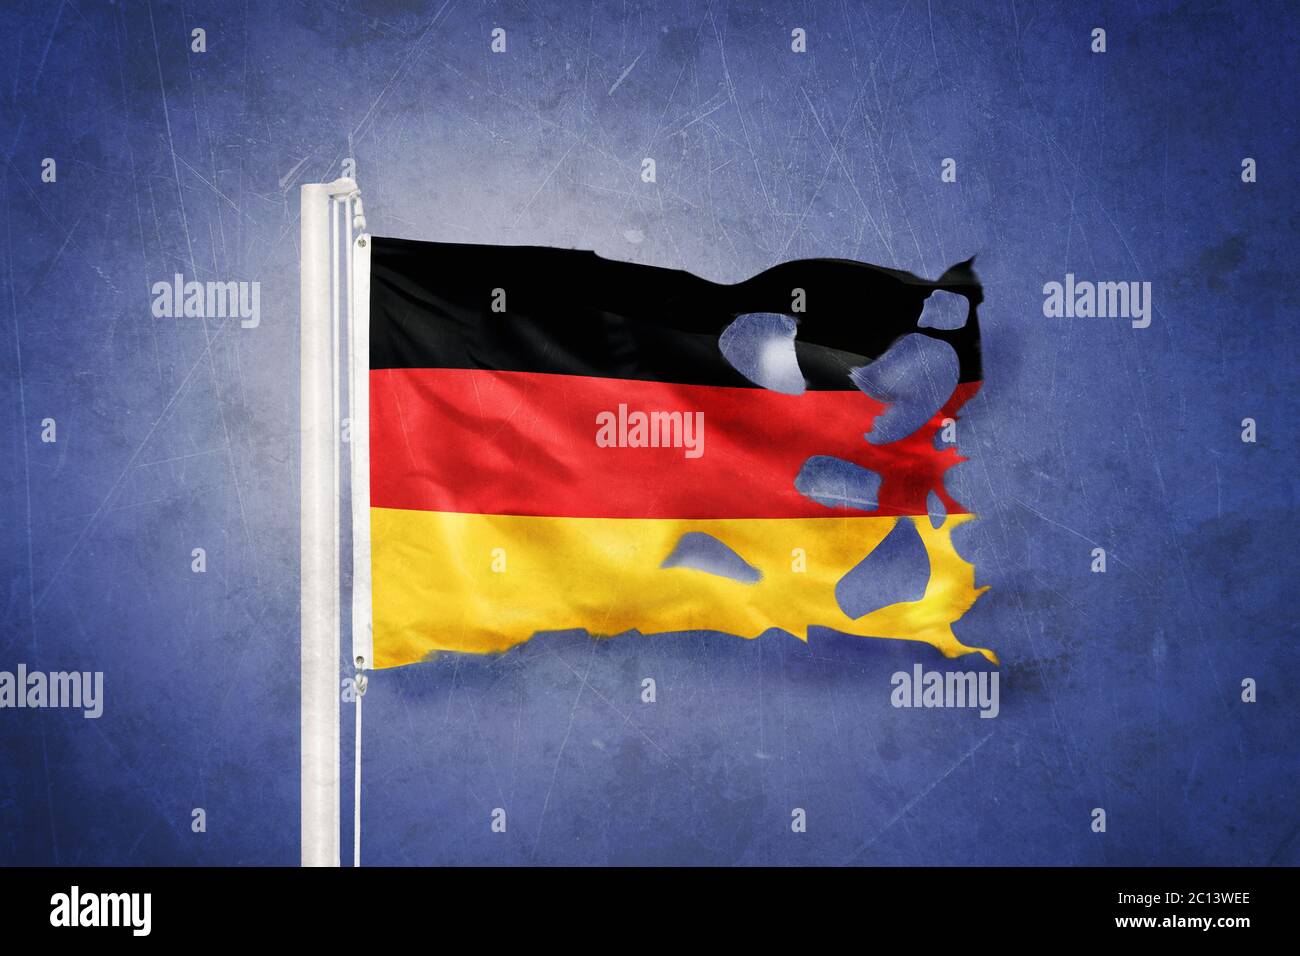 Torn flag of Germany flying against grunge background Stock Photo